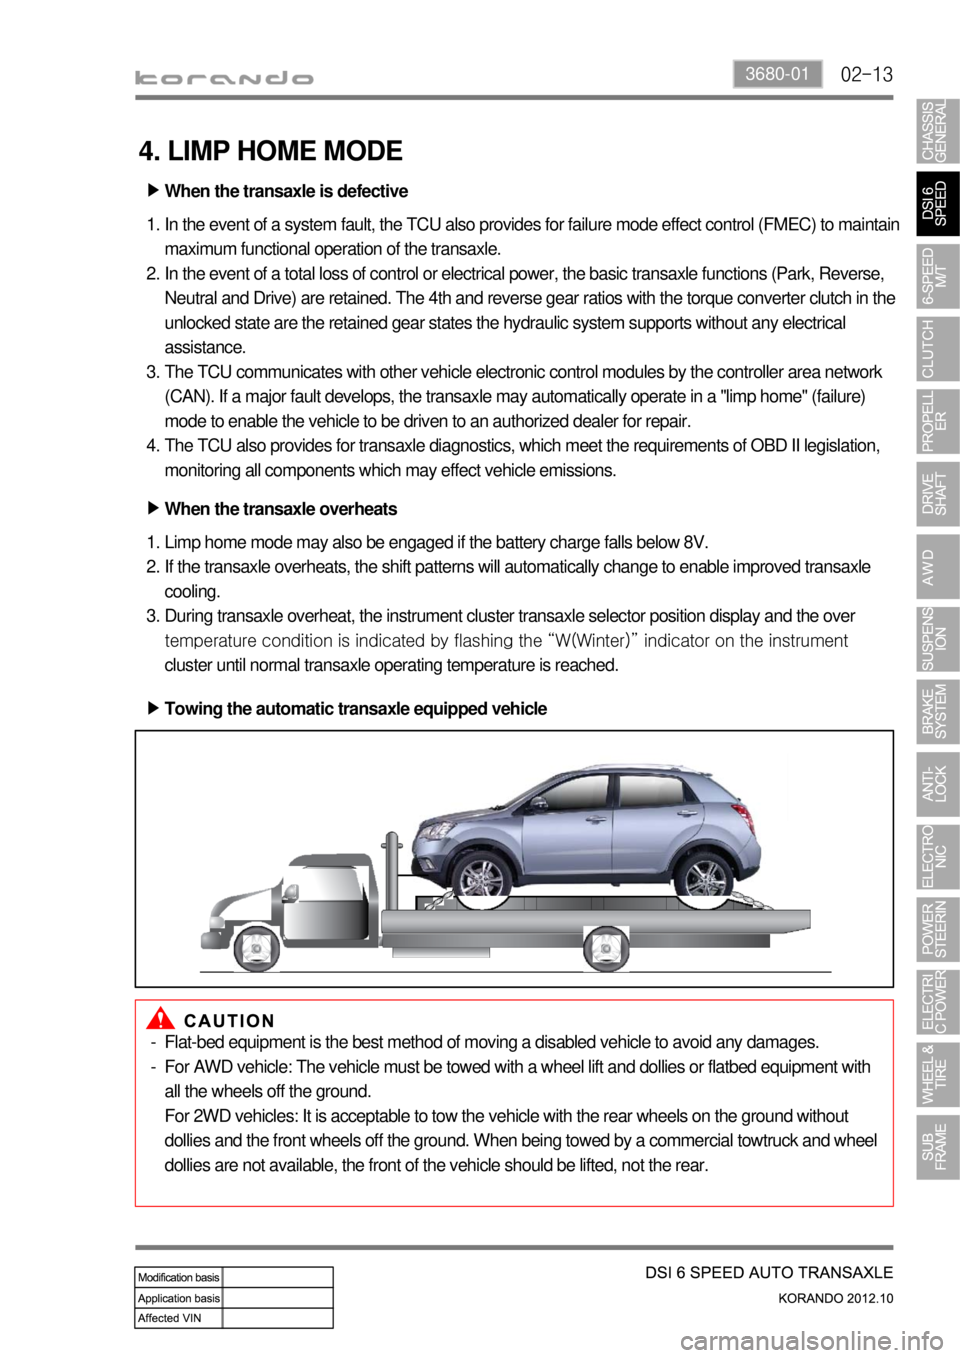 SSANGYONG KORANDO 2012  Service Manual 02-133680-01
4. LIMP HOME MODE
When the transaxle is defective ▶
In the event of a system fault, the TCU also provides for failure mode effect control (FMEC) to maintain 
maximum functional operatio